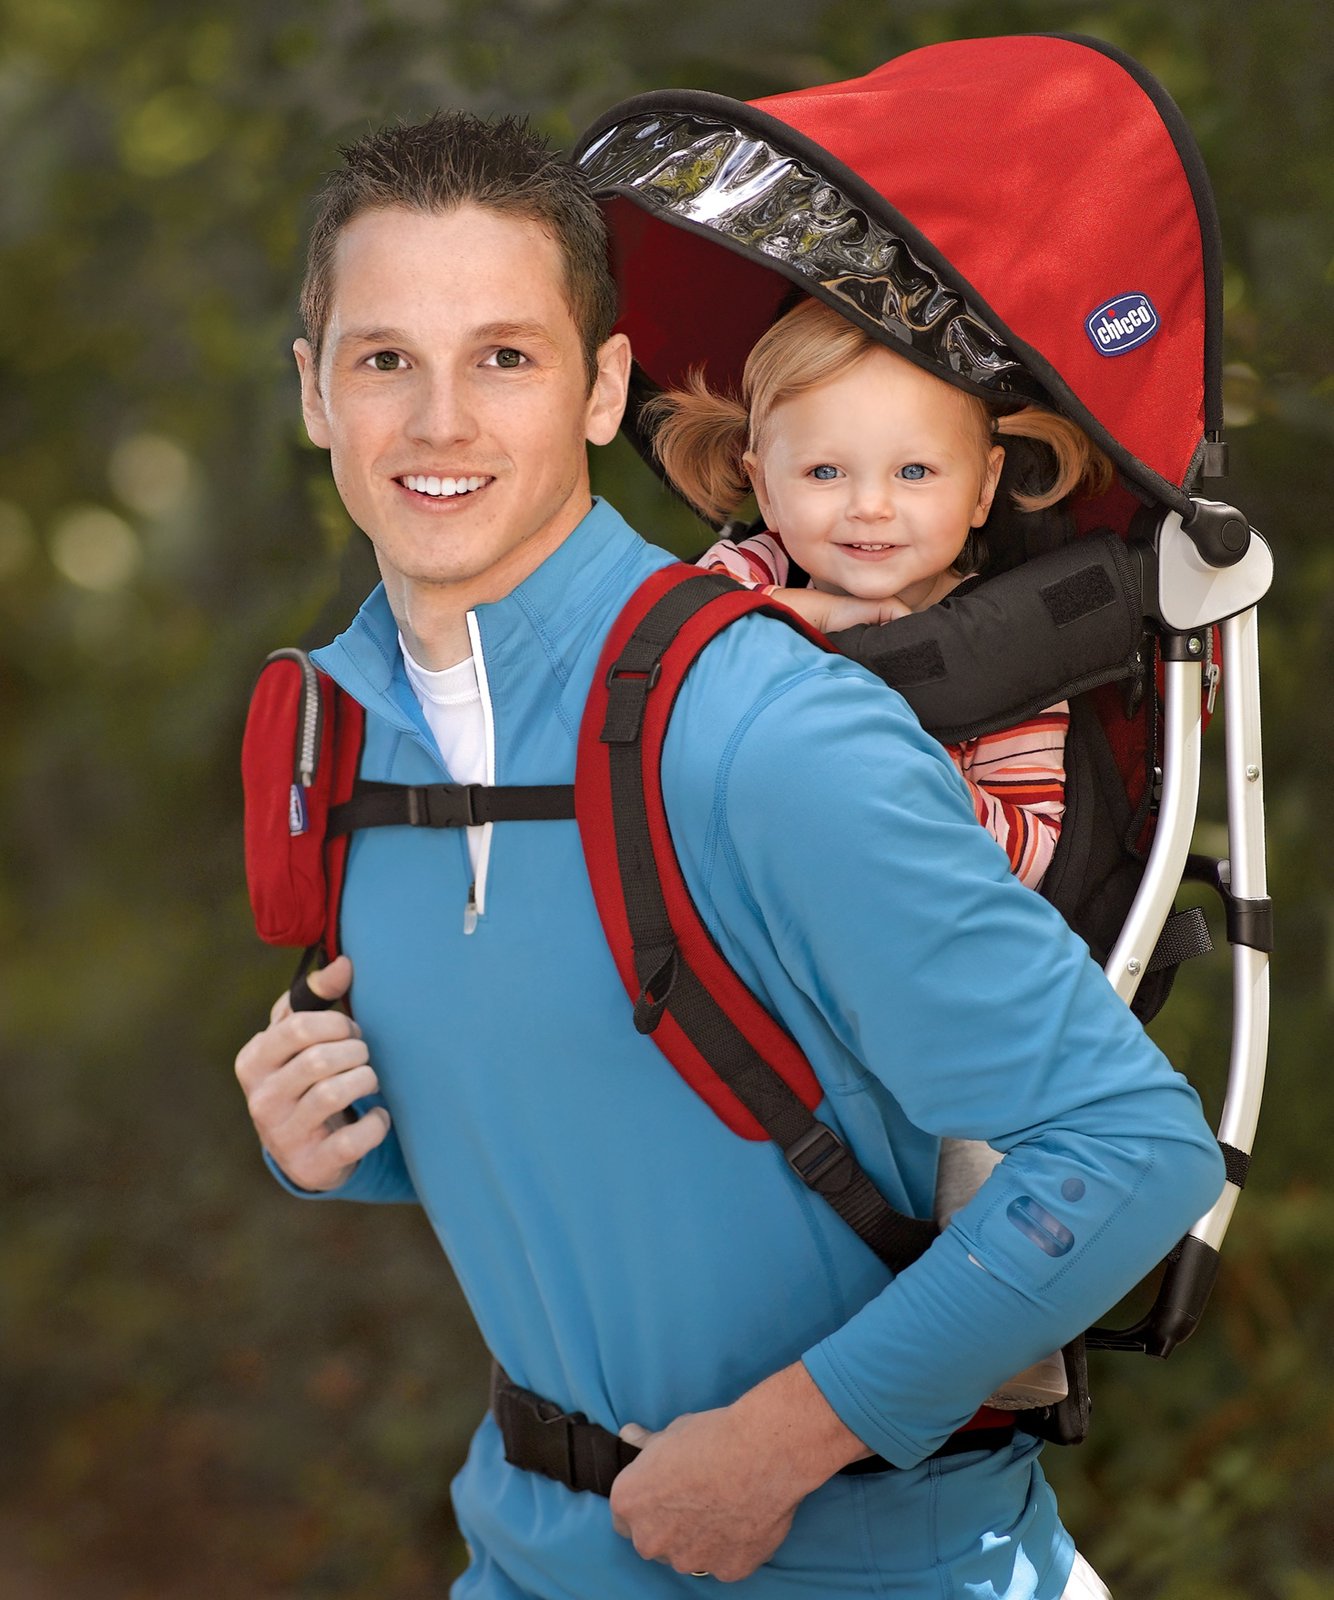 The SmartSupport Backpack